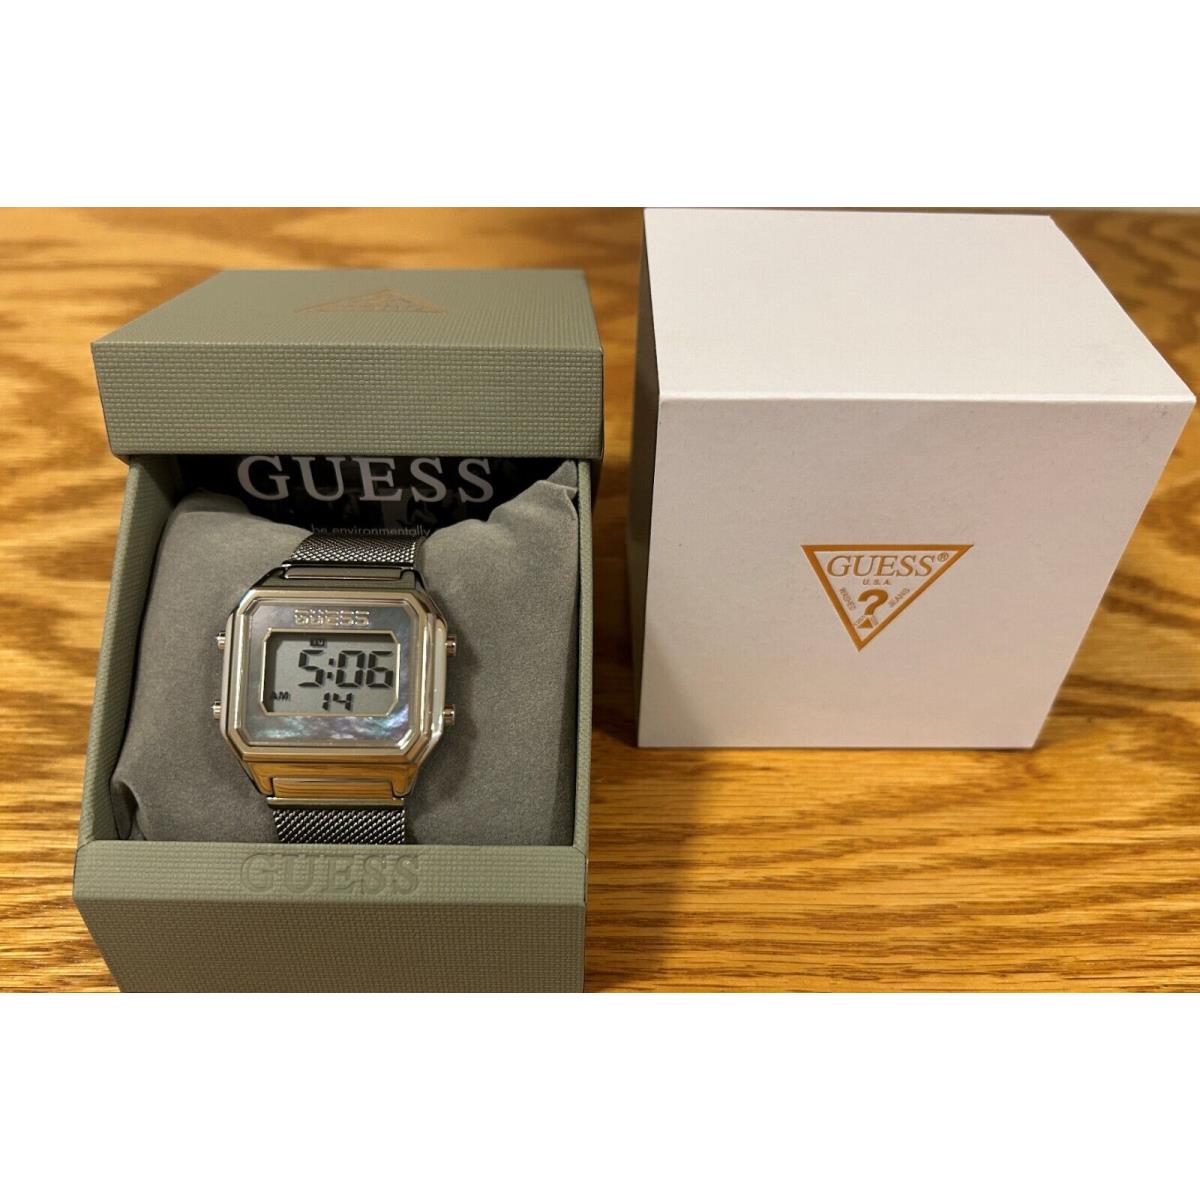 Guess Retro Style Digital Stainless Steel Watch with Mesh Strap